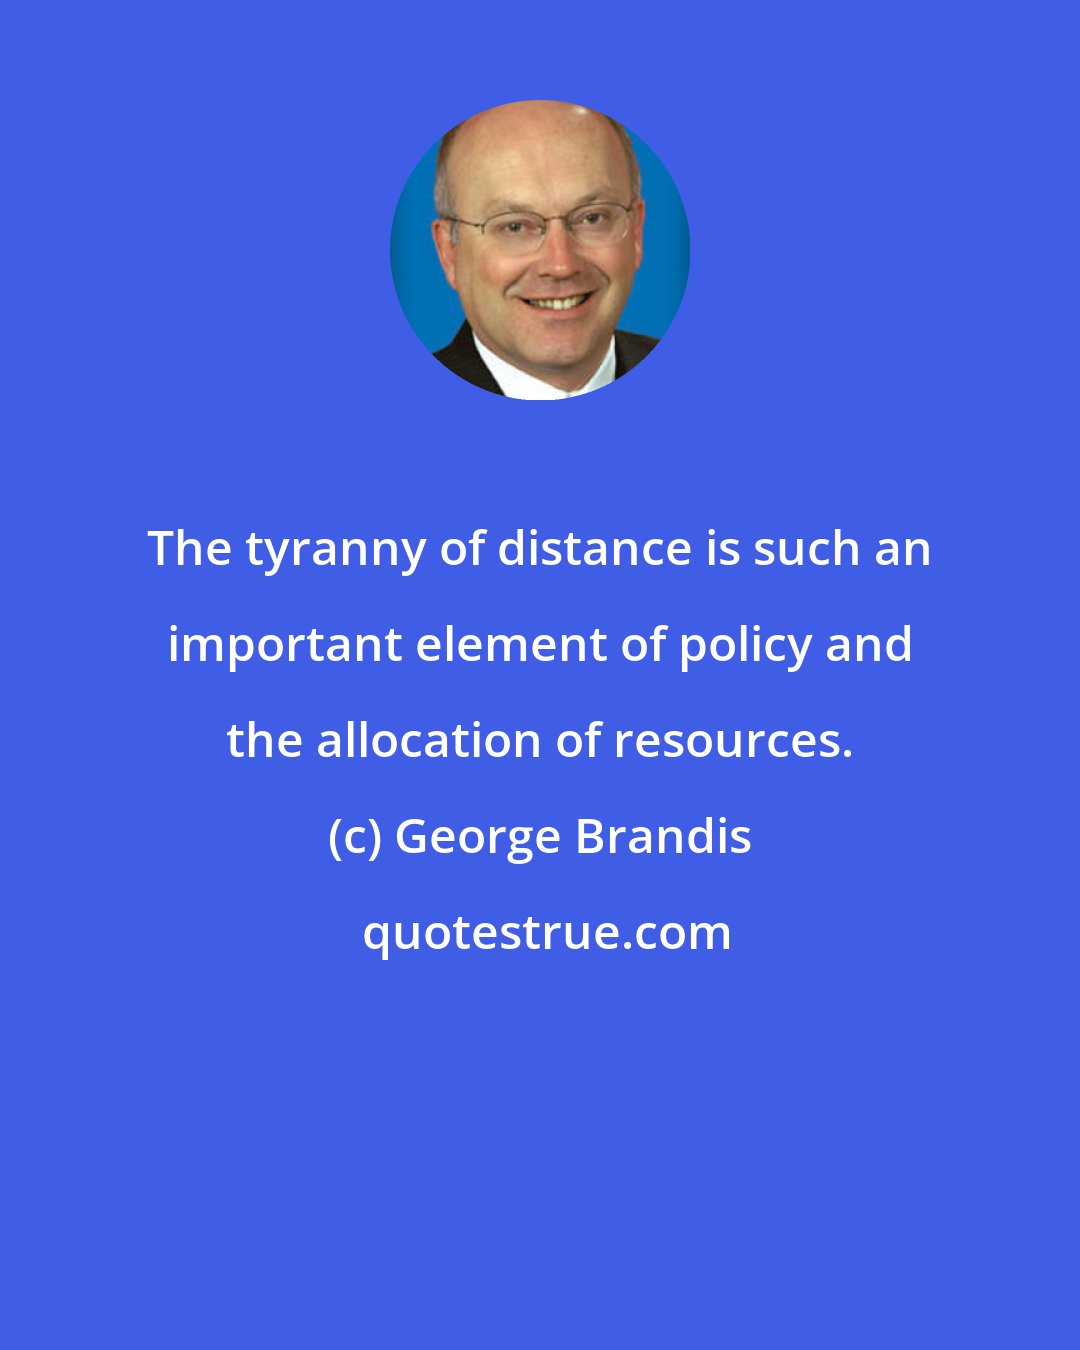 George Brandis: The tyranny of distance is such an important element of policy and the allocation of resources.